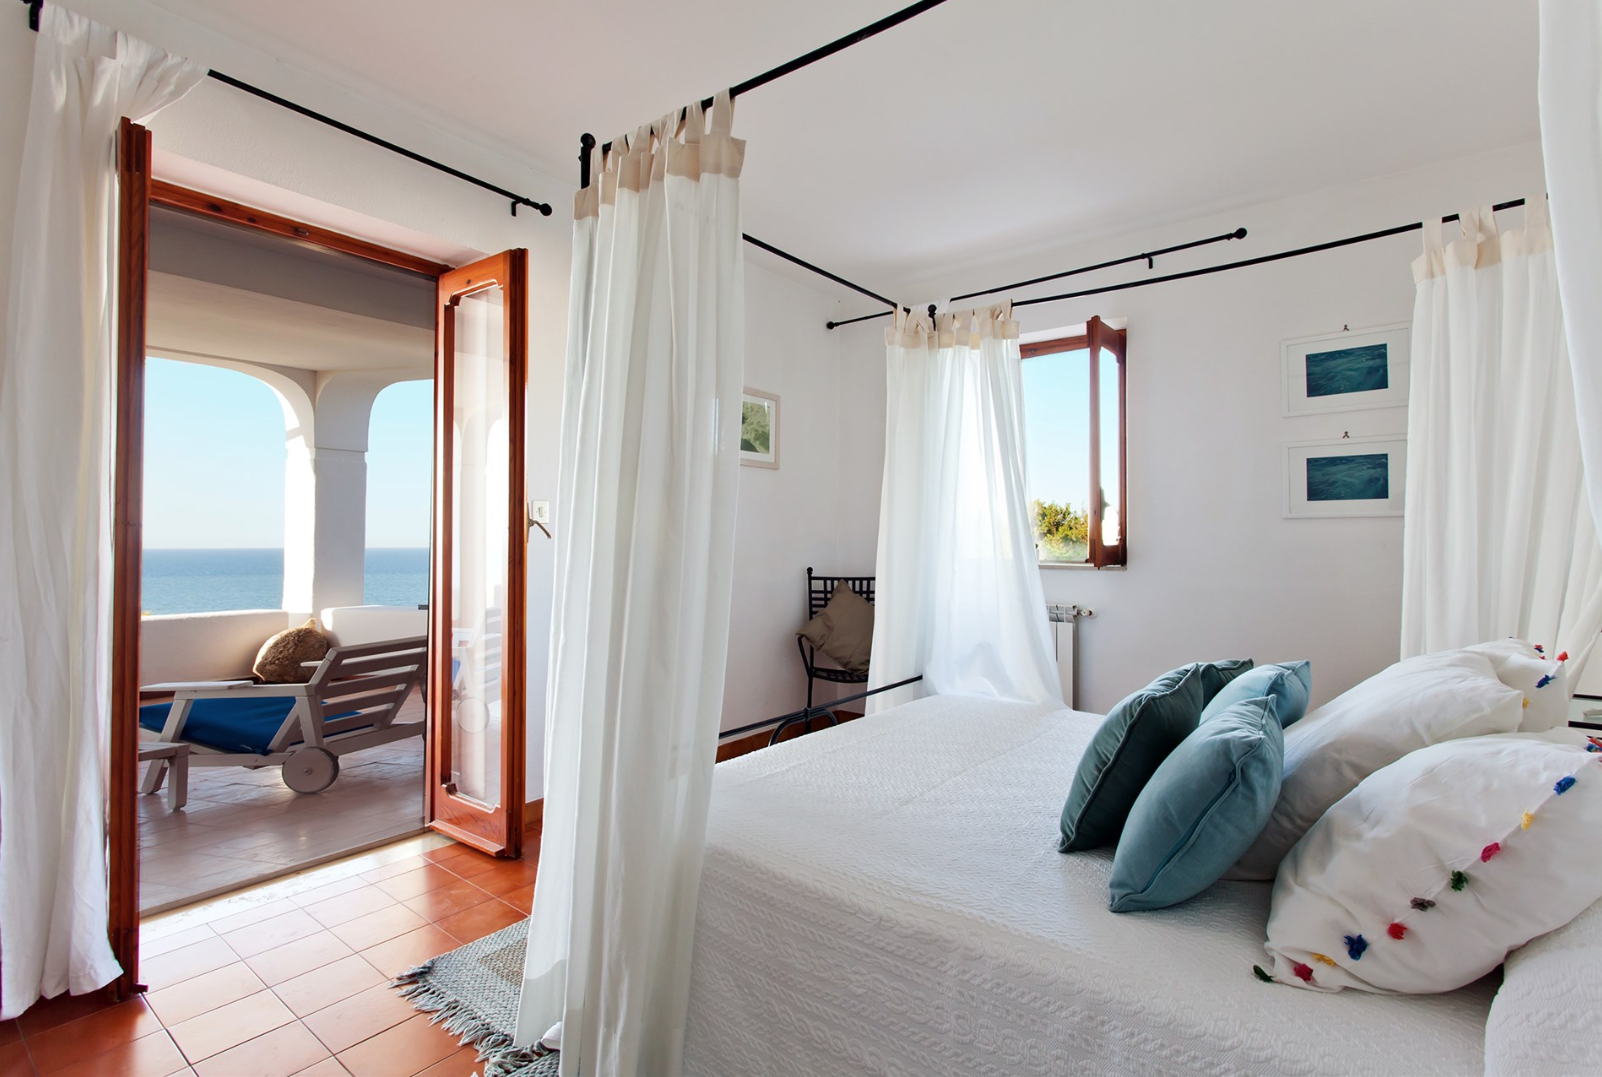 each bedroom has an en-suite bathroom and access to the balcony with sea view